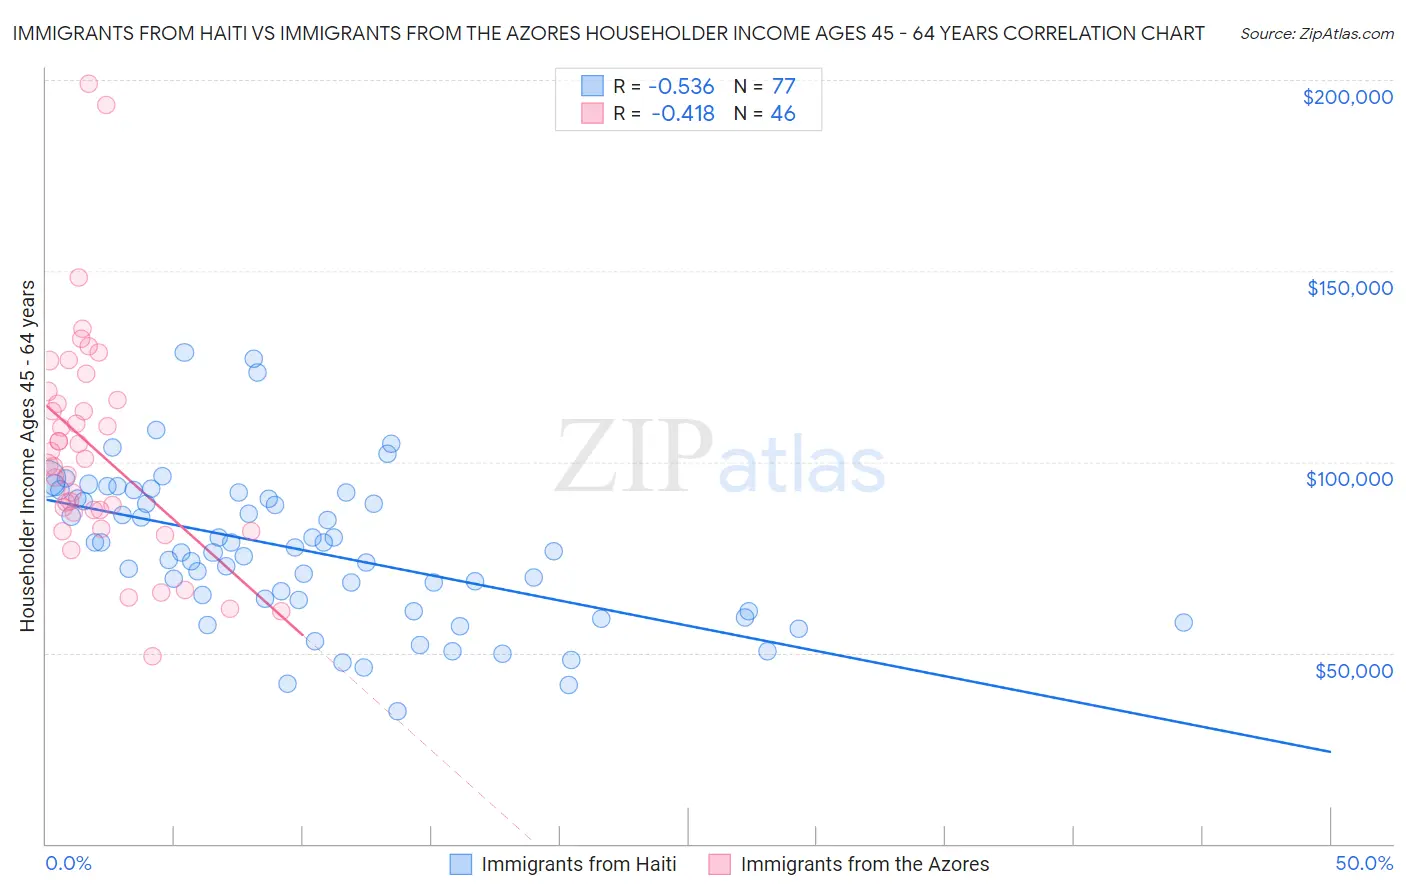 Immigrants from Haiti vs Immigrants from the Azores Householder Income Ages 45 - 64 years